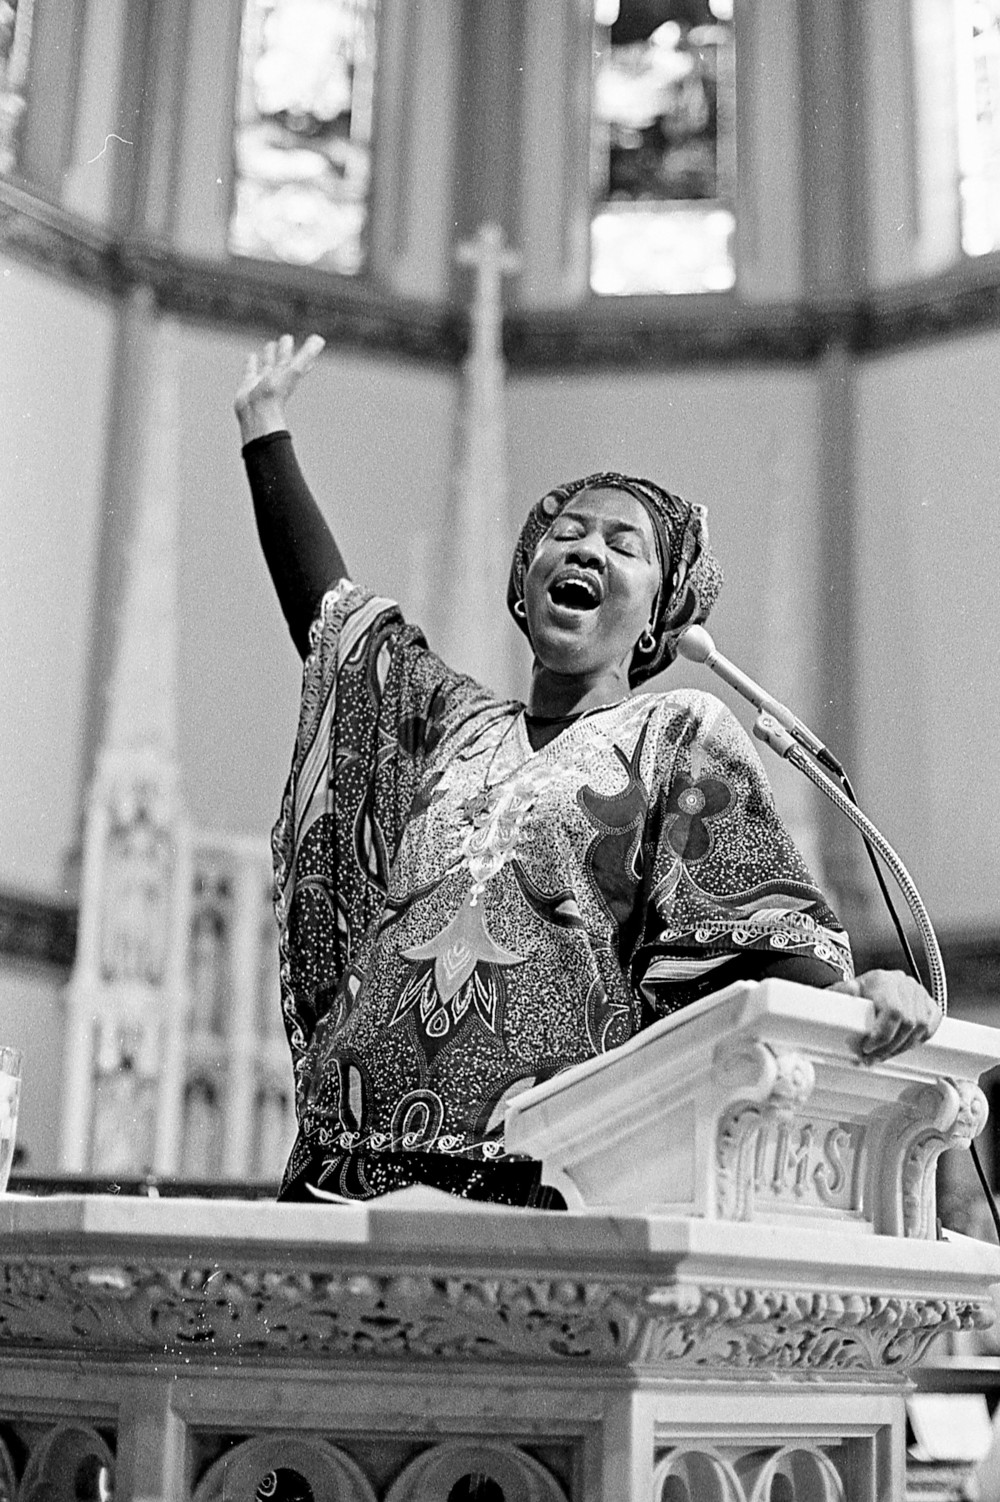 A black and white photo of a Black woman at a lecturn with one arm raised in the air. She wears patterned fabric around her head and torso.